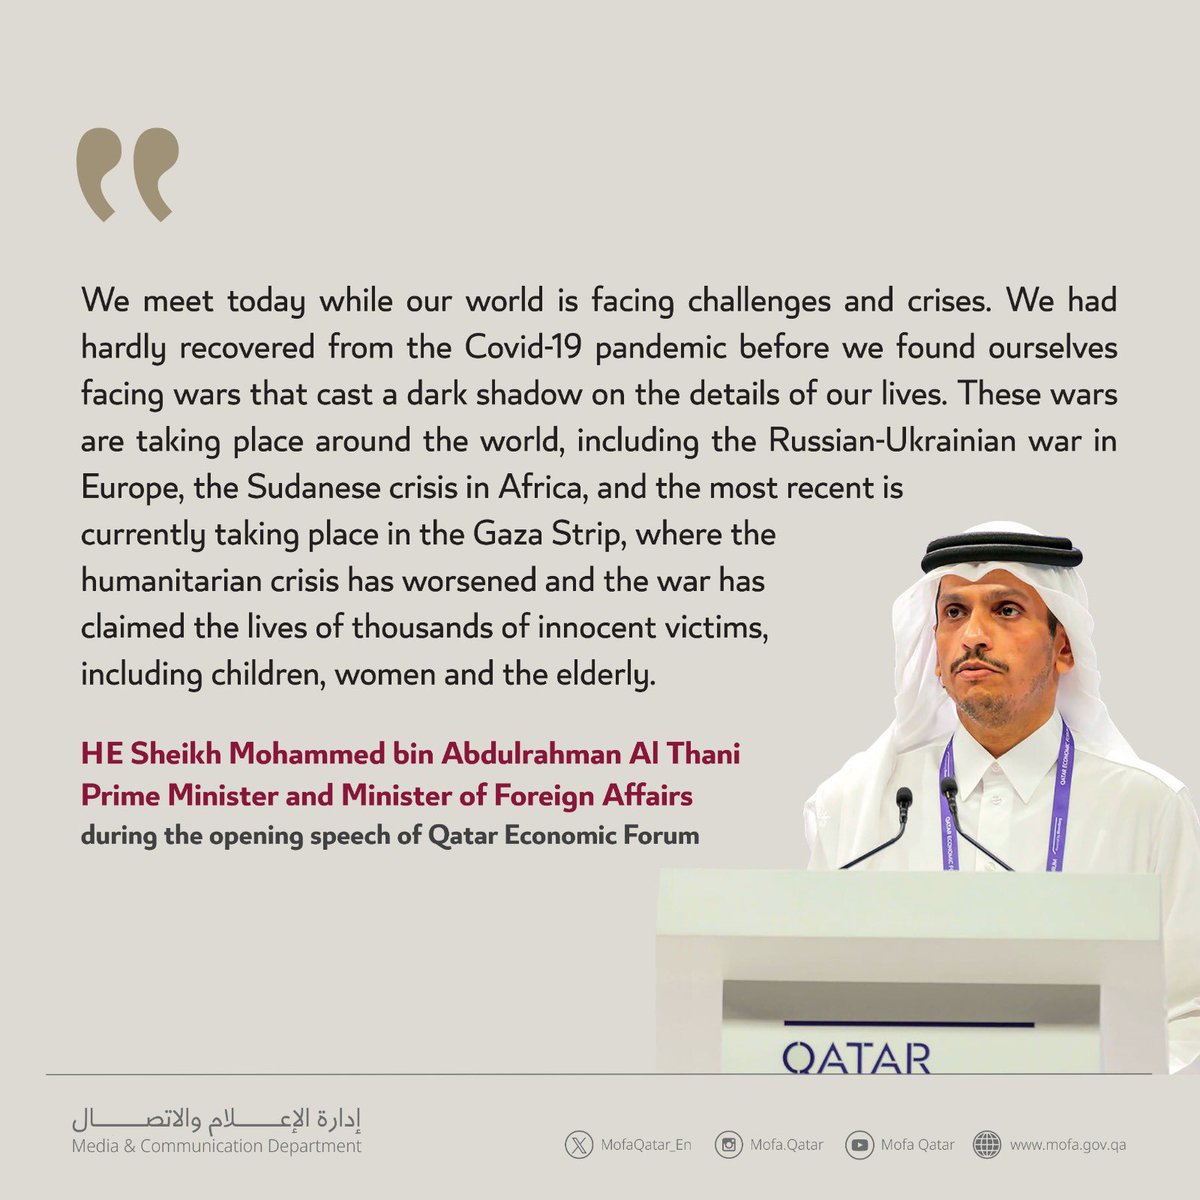 HE Sheikh Mohammed bin Abdulrahman Al Thani @MBA_AlThani_ , Prime Minister and Minister of Foreign Affairs during the opening speech of Qatar Economic Forum #MOFAQatar